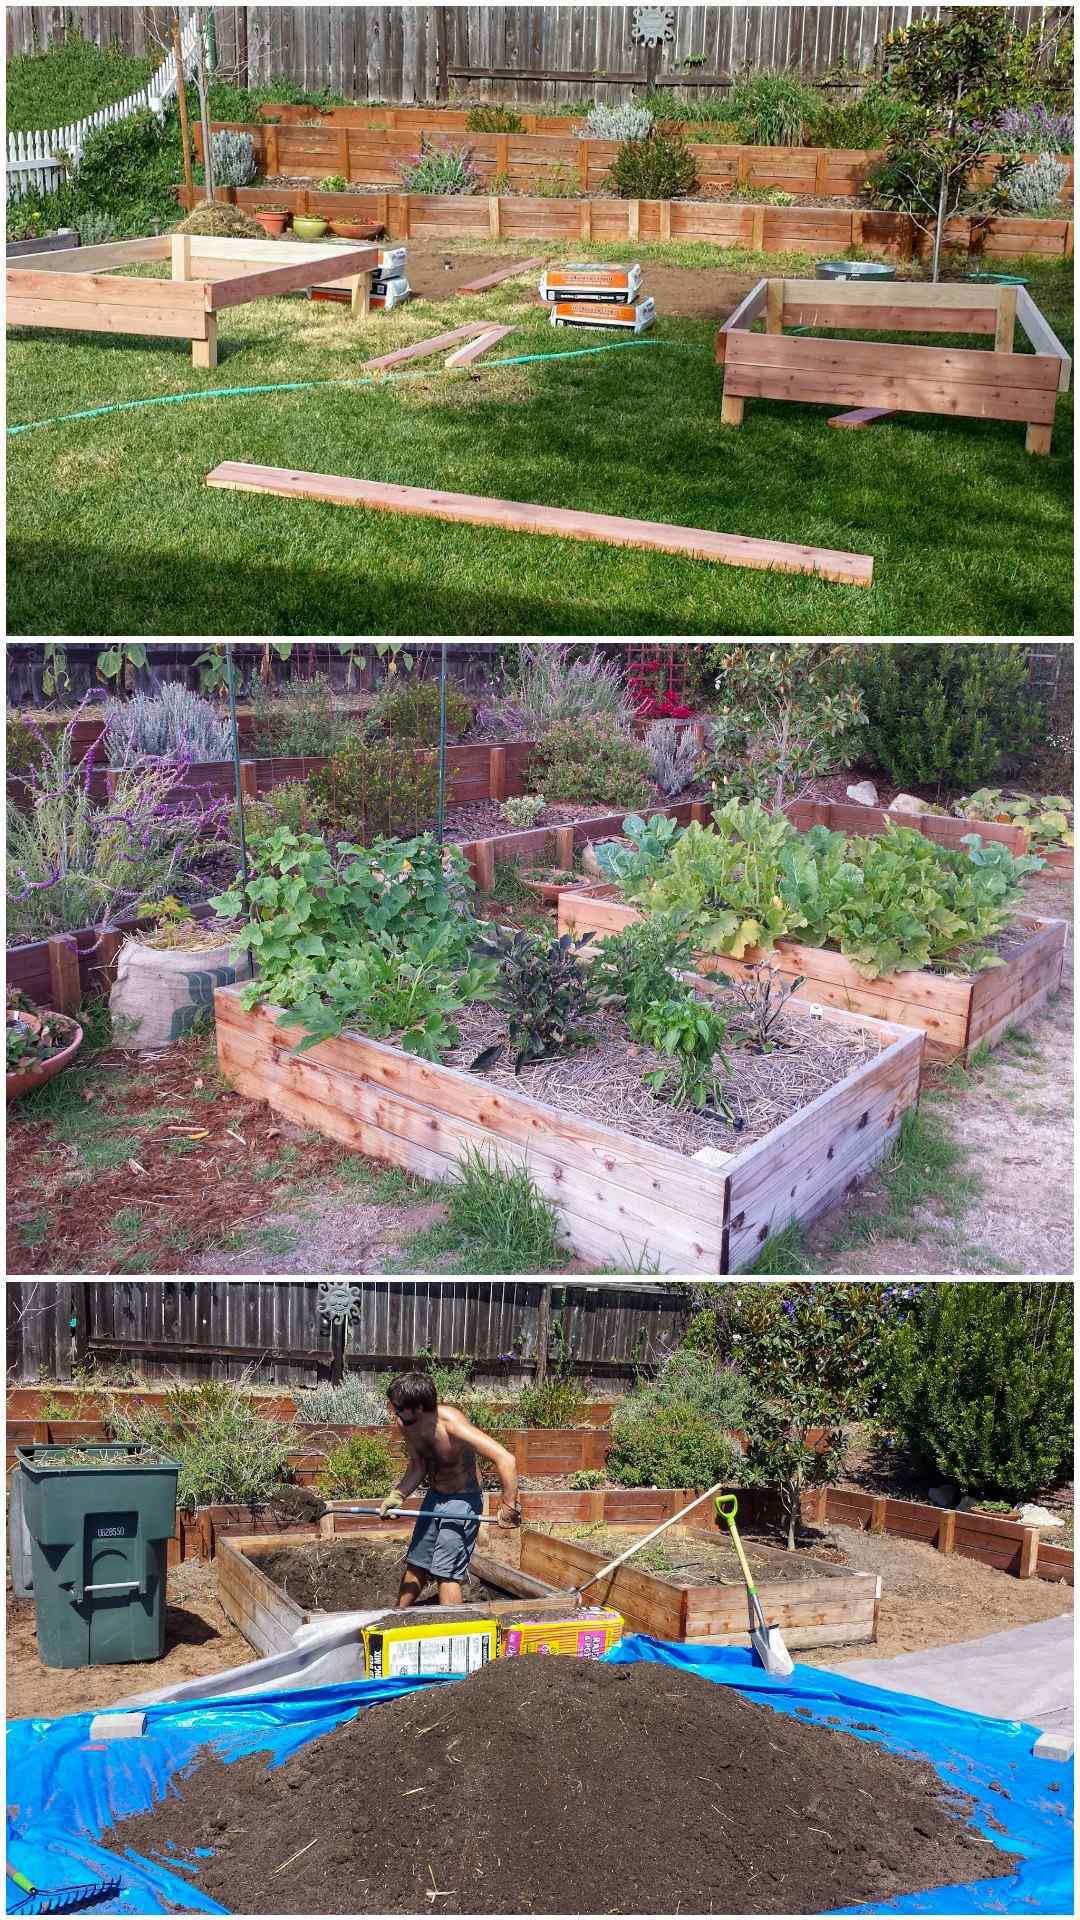 A three part image collage, the first image shows raised garden beds halfway through construction, there are two similar sized patches of dirt where the grass has been removed as a place for the garden beds. The second image shows the garden beds after four of six months of use and there are weeds growing up and around the garden beds amongst the vegetables, the third image shows Aaron removing the soil from the beds because they are infested with weeds and the space needs to be redone to do it correctly. This was a lesson learned through trial and error. 